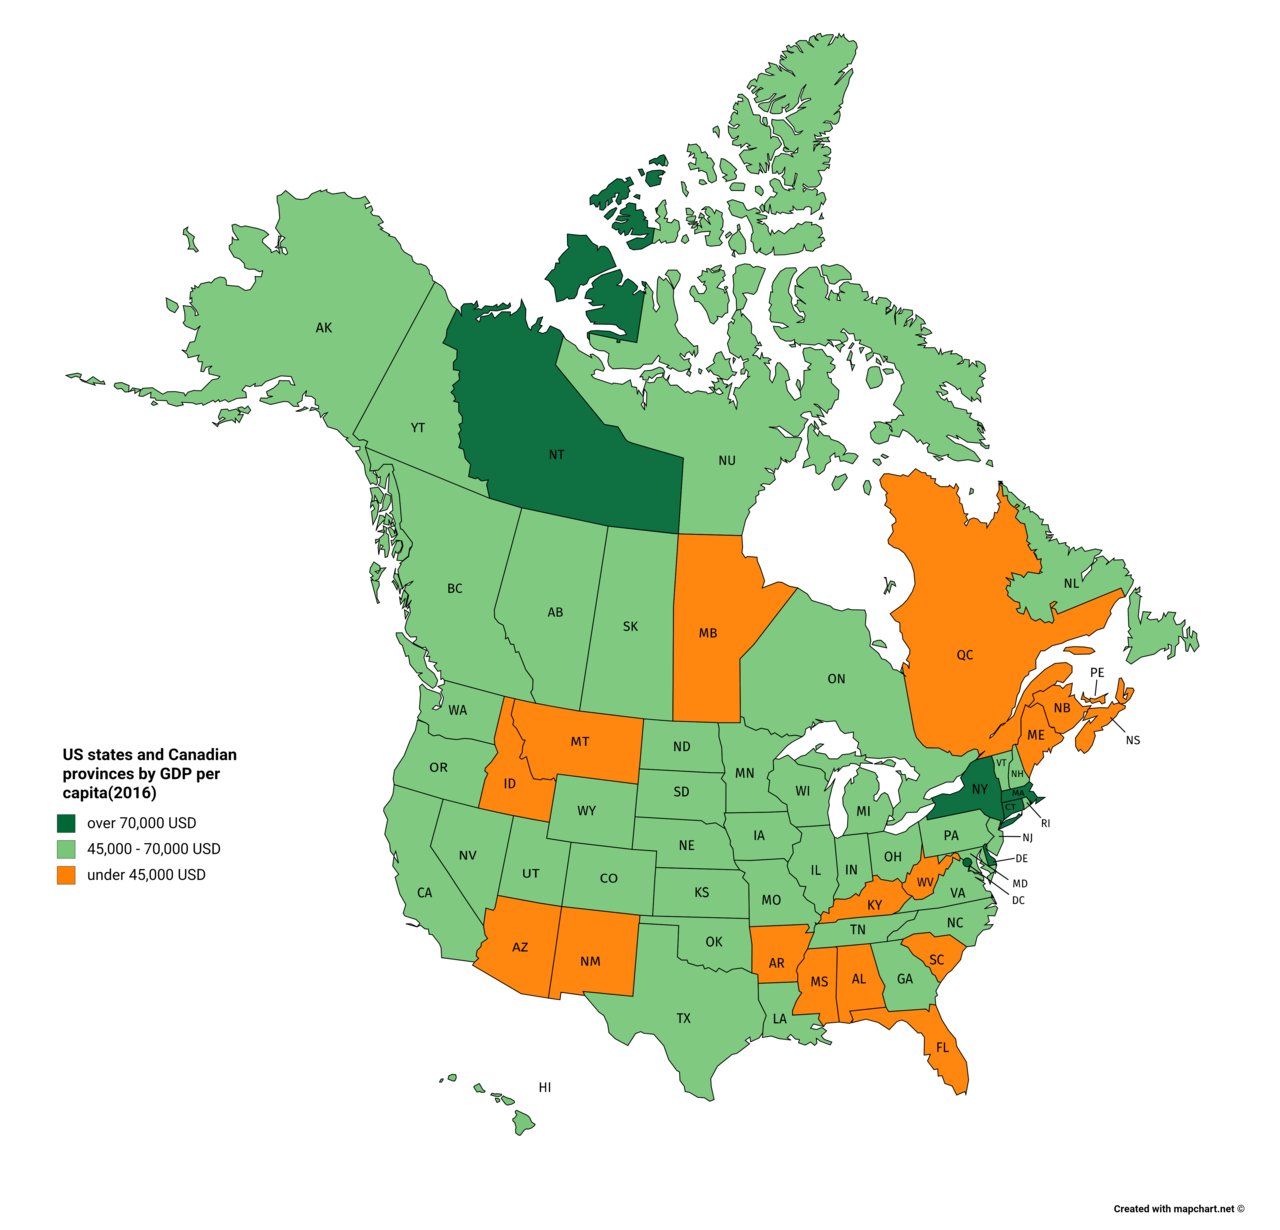 rattle Dislike rim OnlMaps on Twitter: "US states and Canadian provinces by GDP per capita,  2014. https://t.co/i8M8A0Ffhh https://t.co/NYC47bmbXi" / Twitter